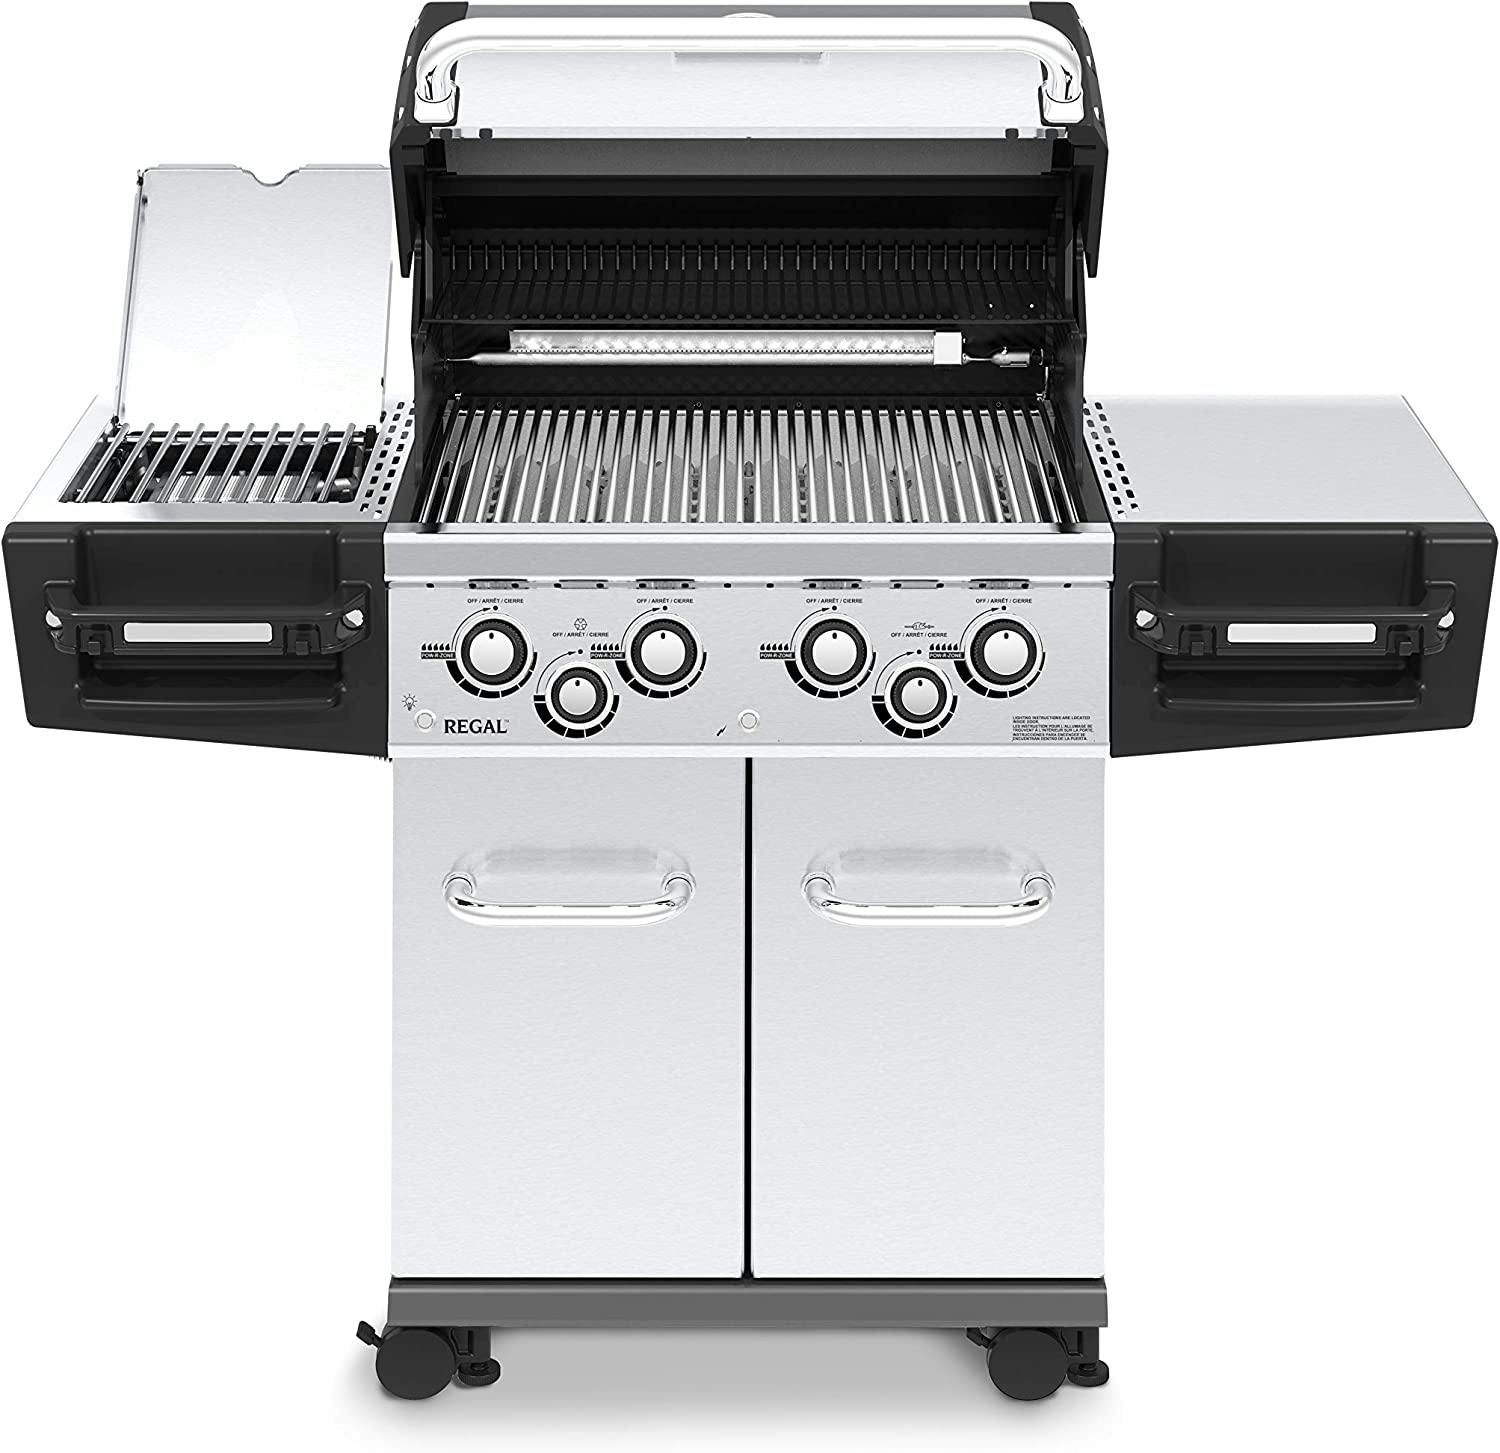 Broil King Regal S 490 Pro Infrared Gas Grill